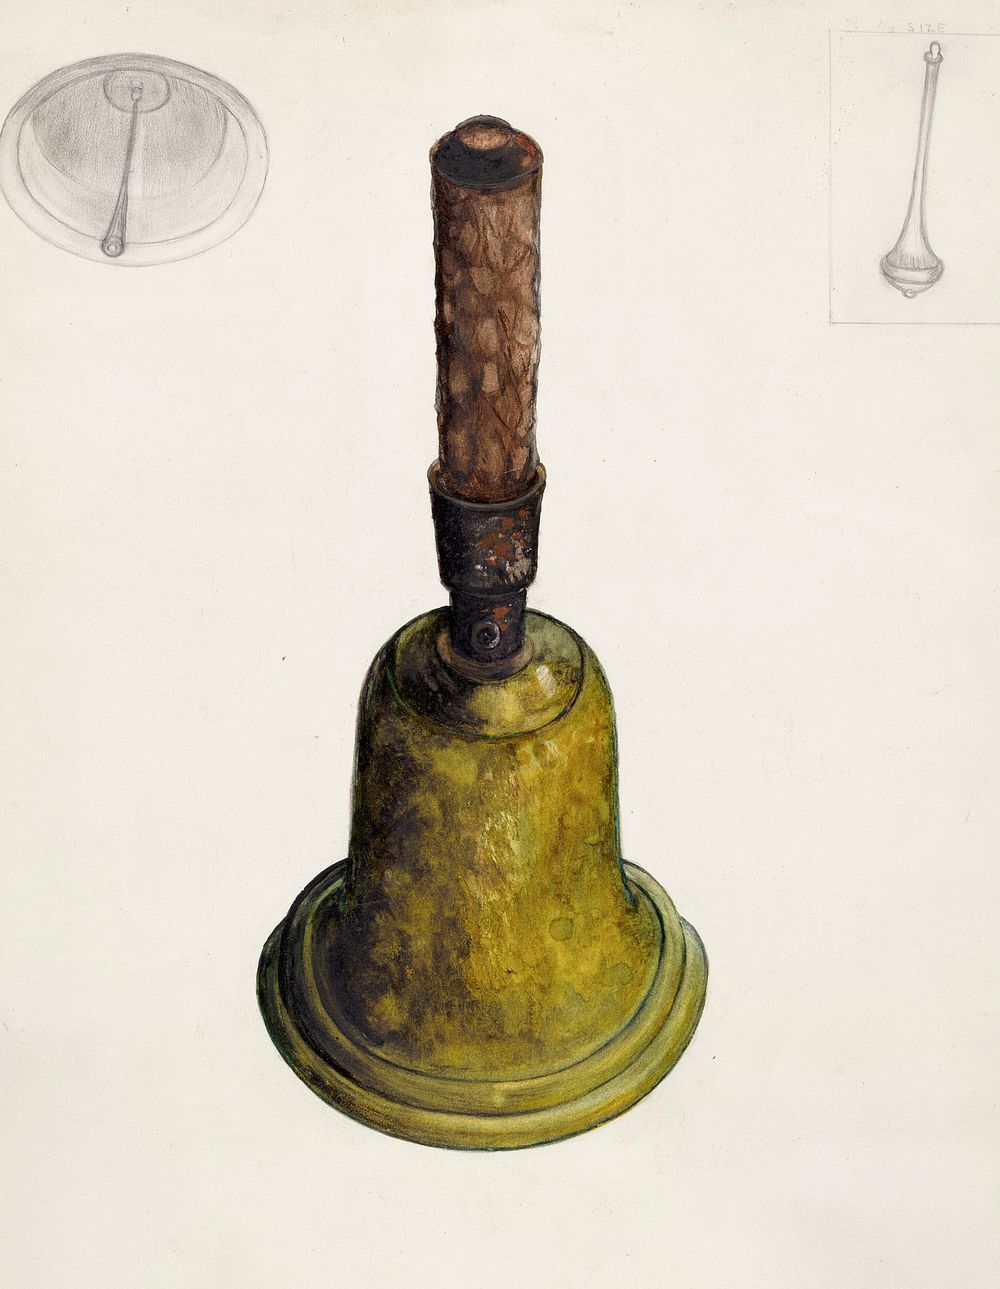 Bell (ca.1937) by Edna C. Rex. Original from The National Gallery of Art. Digitally enhanced by rawpixel.